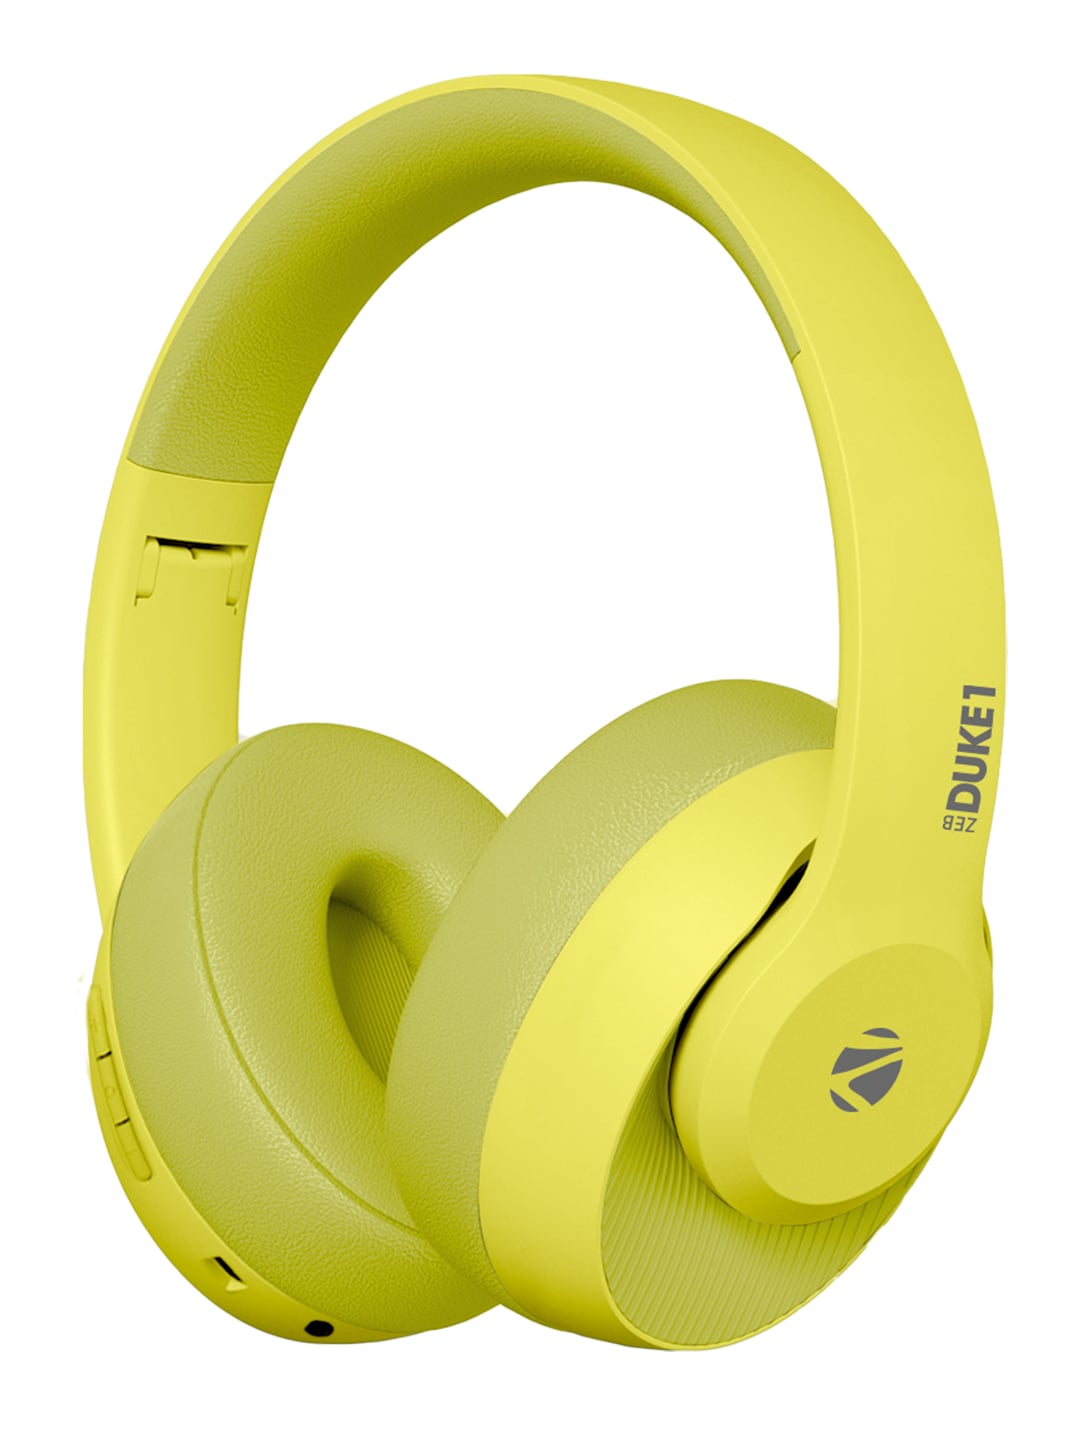 ZEBRONICS Zeb-DUKE1 Wireless Over The Ear Headphone with Voice Assistant - Lime Green Price in India